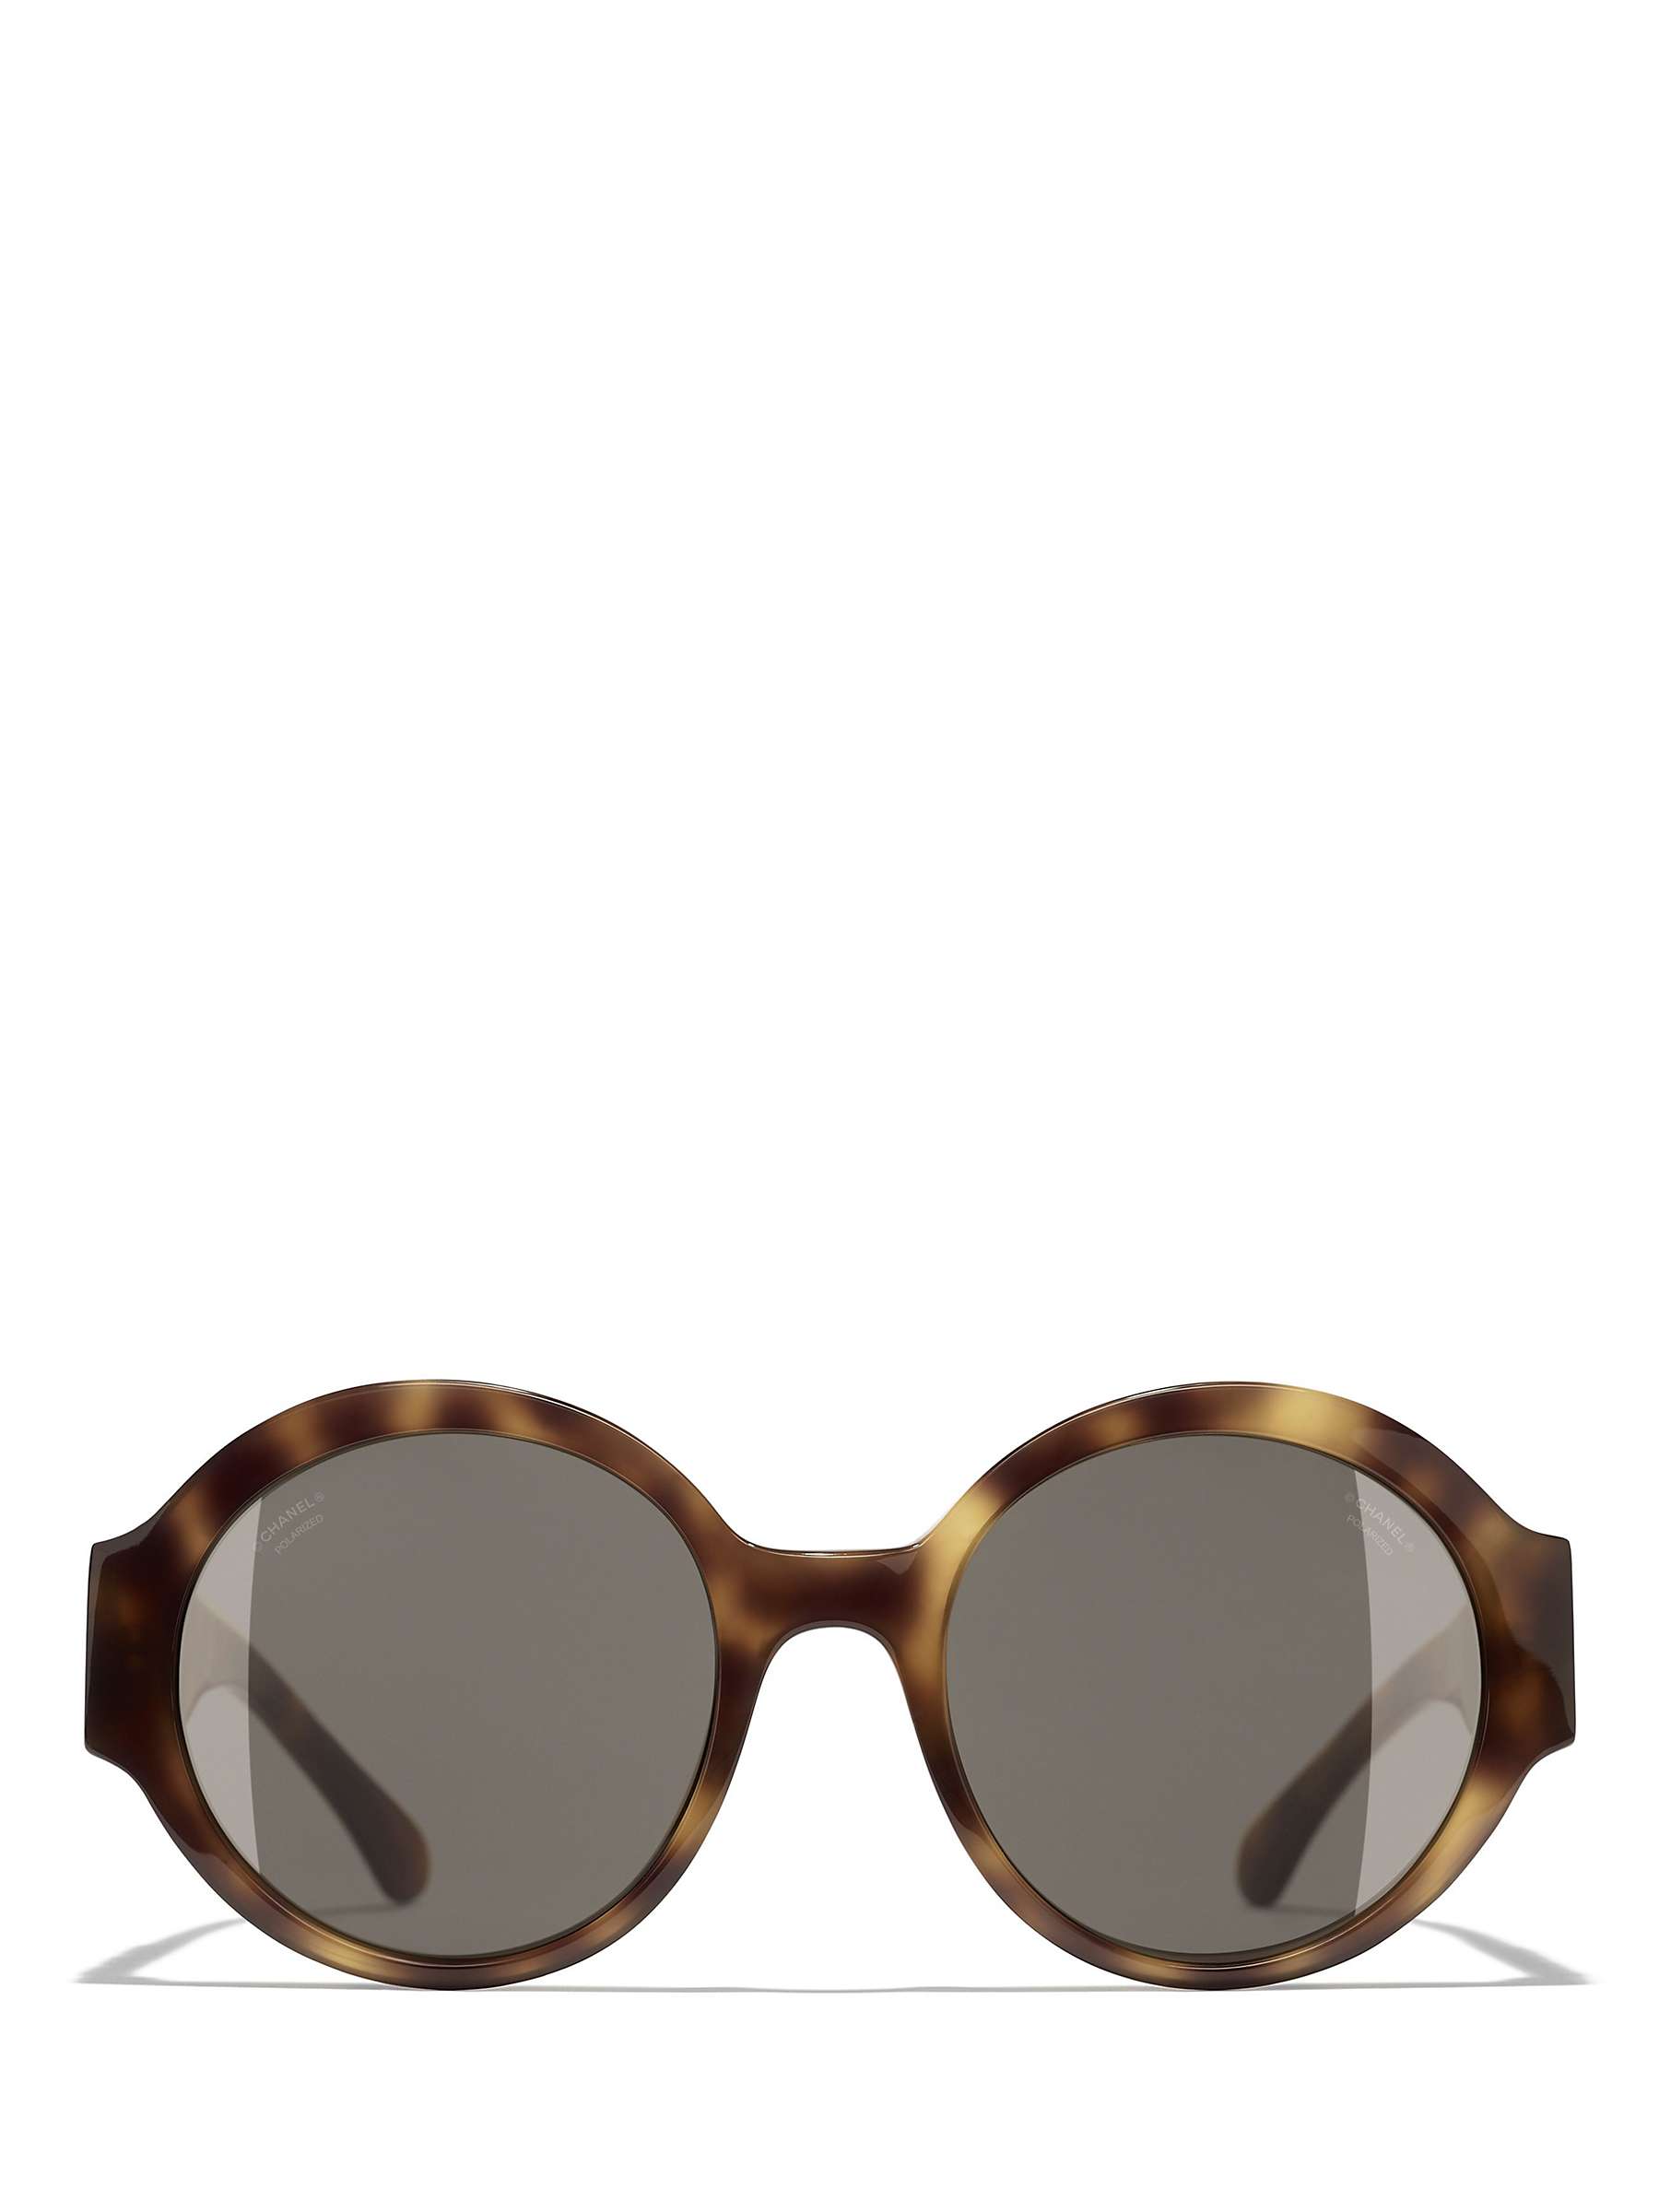 Buy CHANEL Oval Sunglasses CH5410 Havana/Brown Online at johnlewis.com